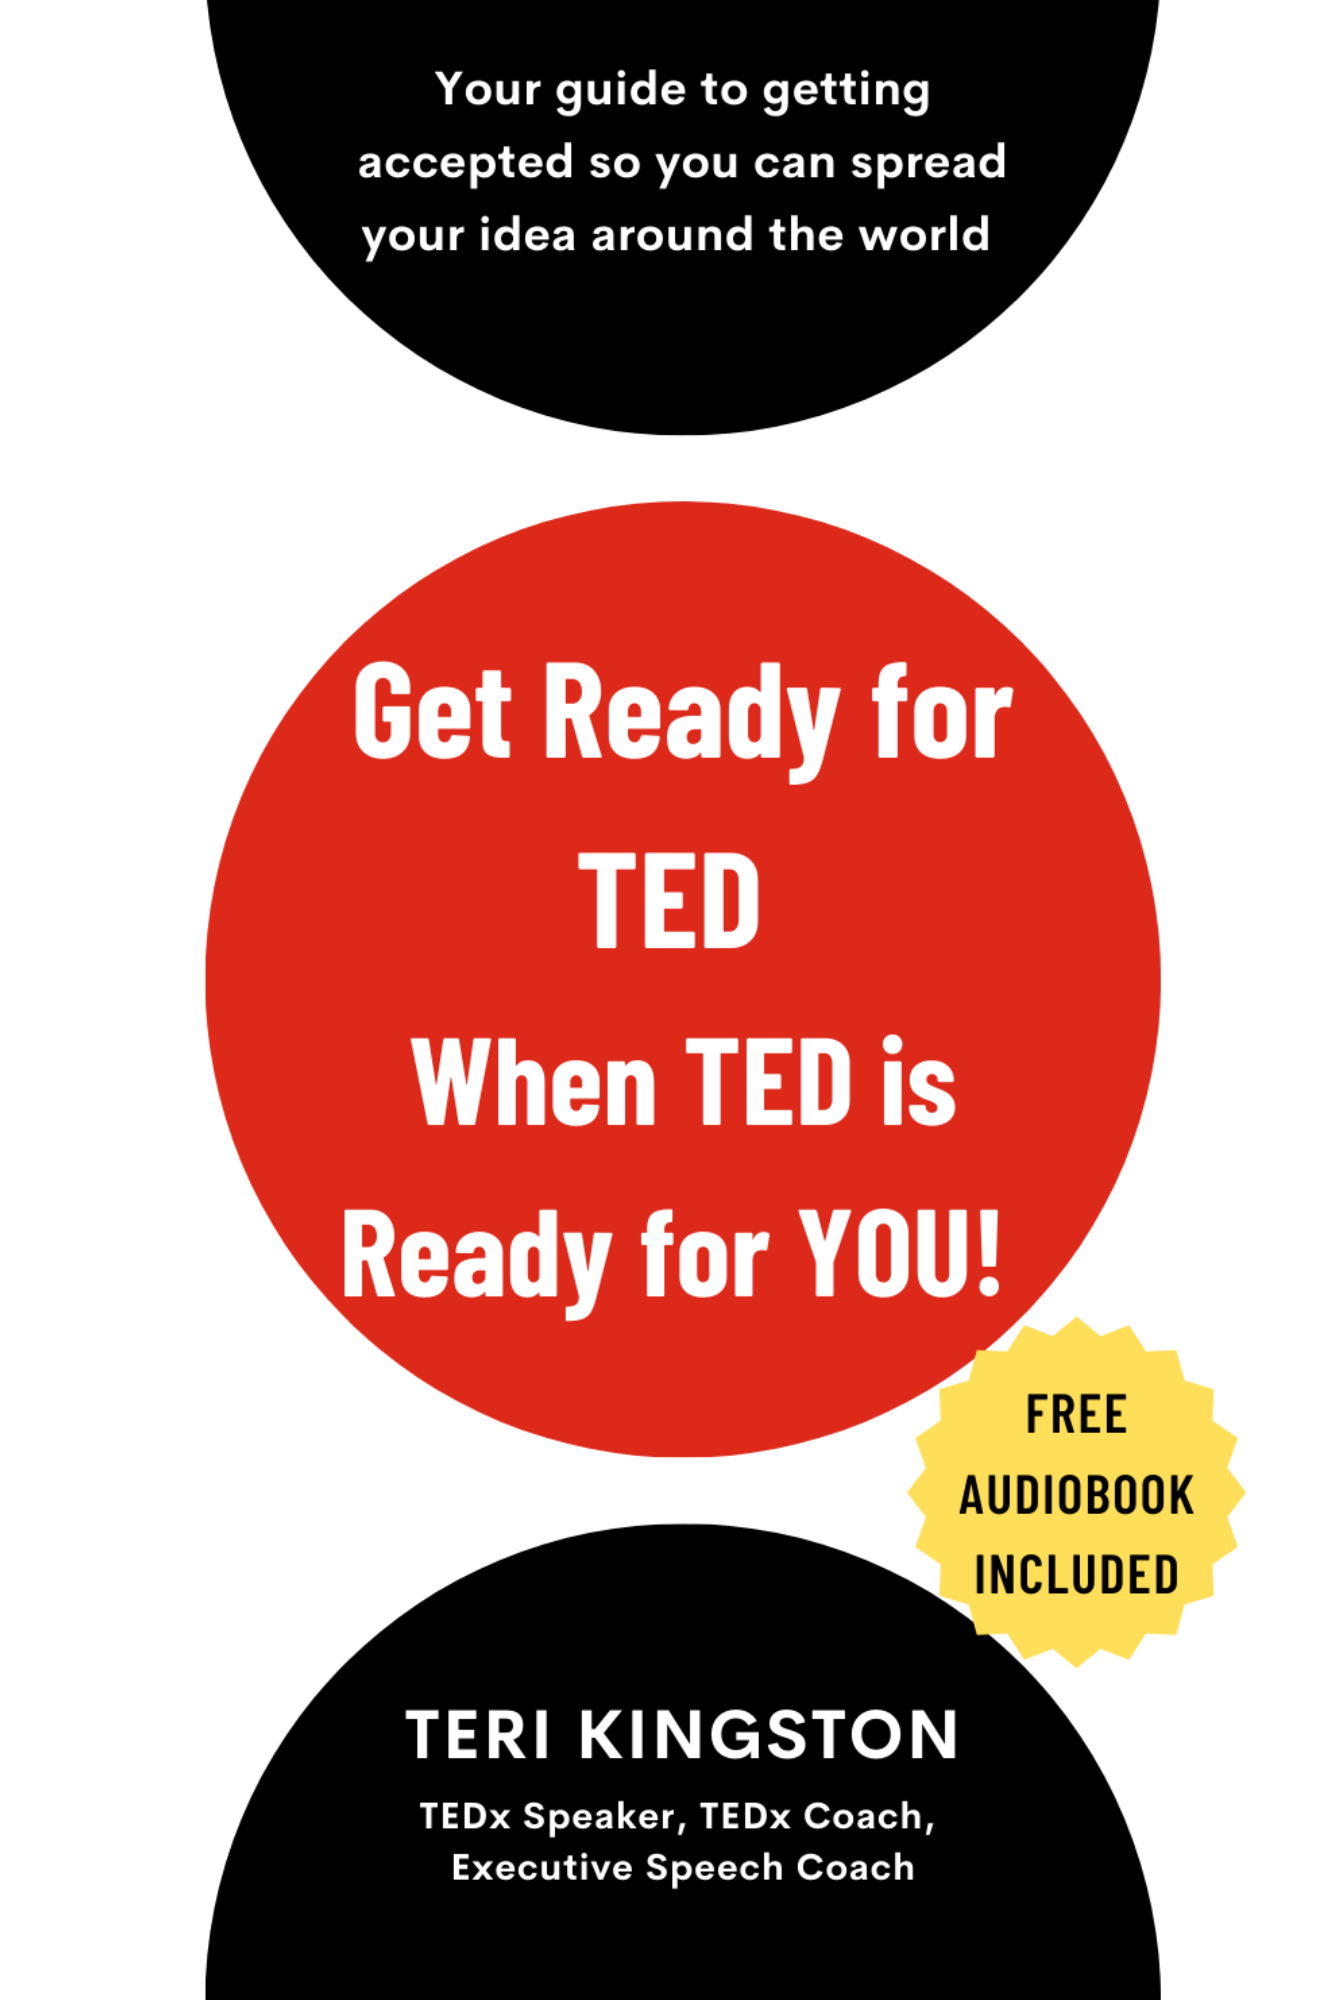 teri kingson get ready for TED when ted is ready for you